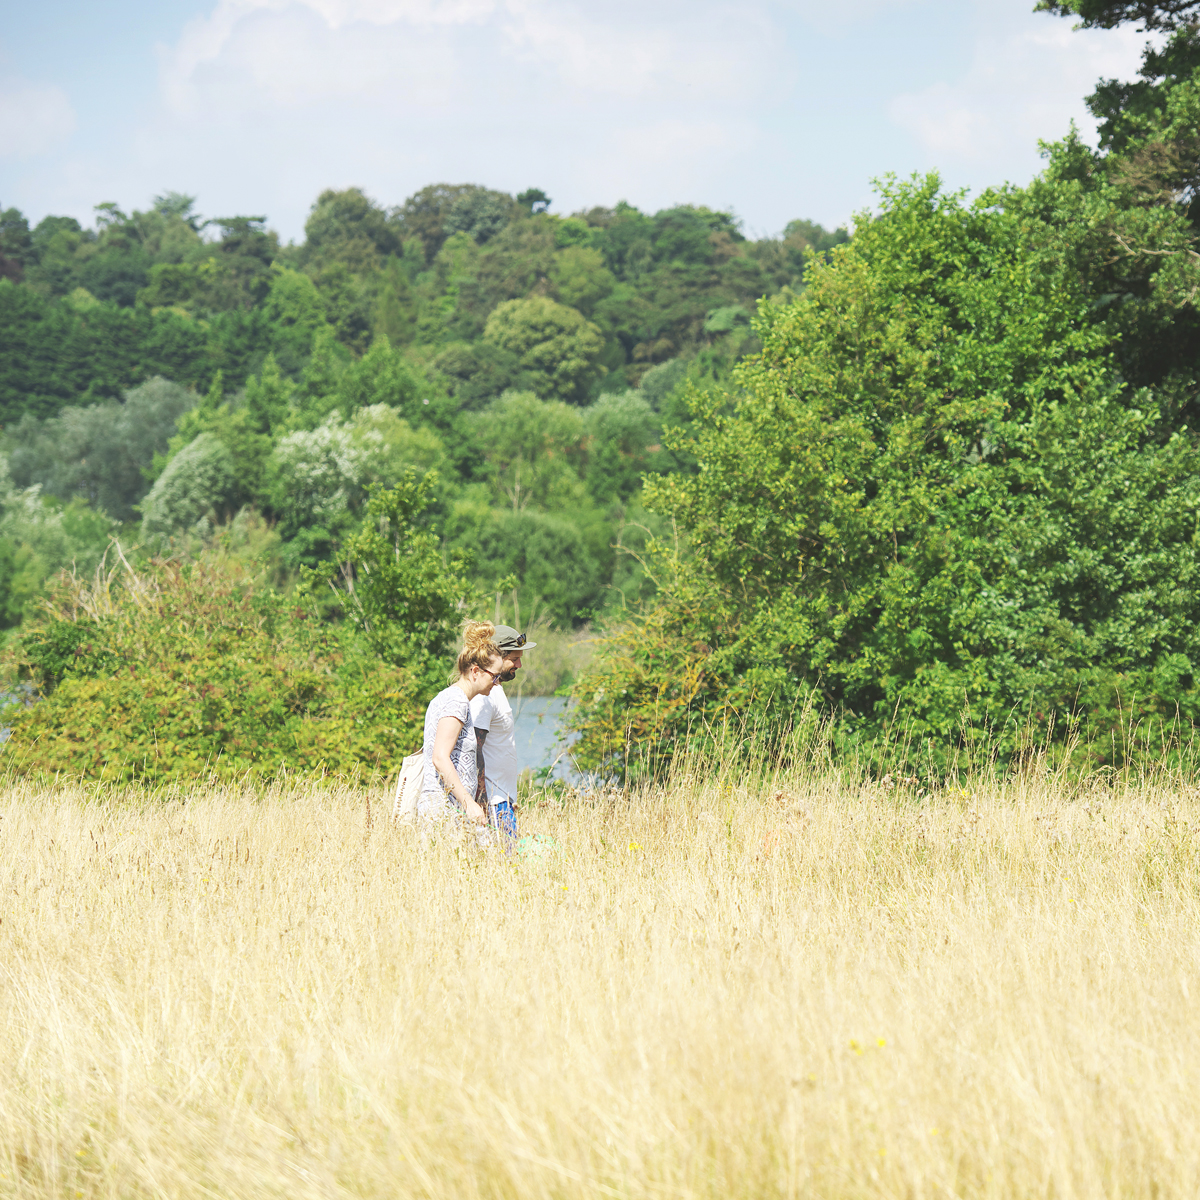 Two people walking infront of the grassy, leafy surroundings of Whitlingham Country Park